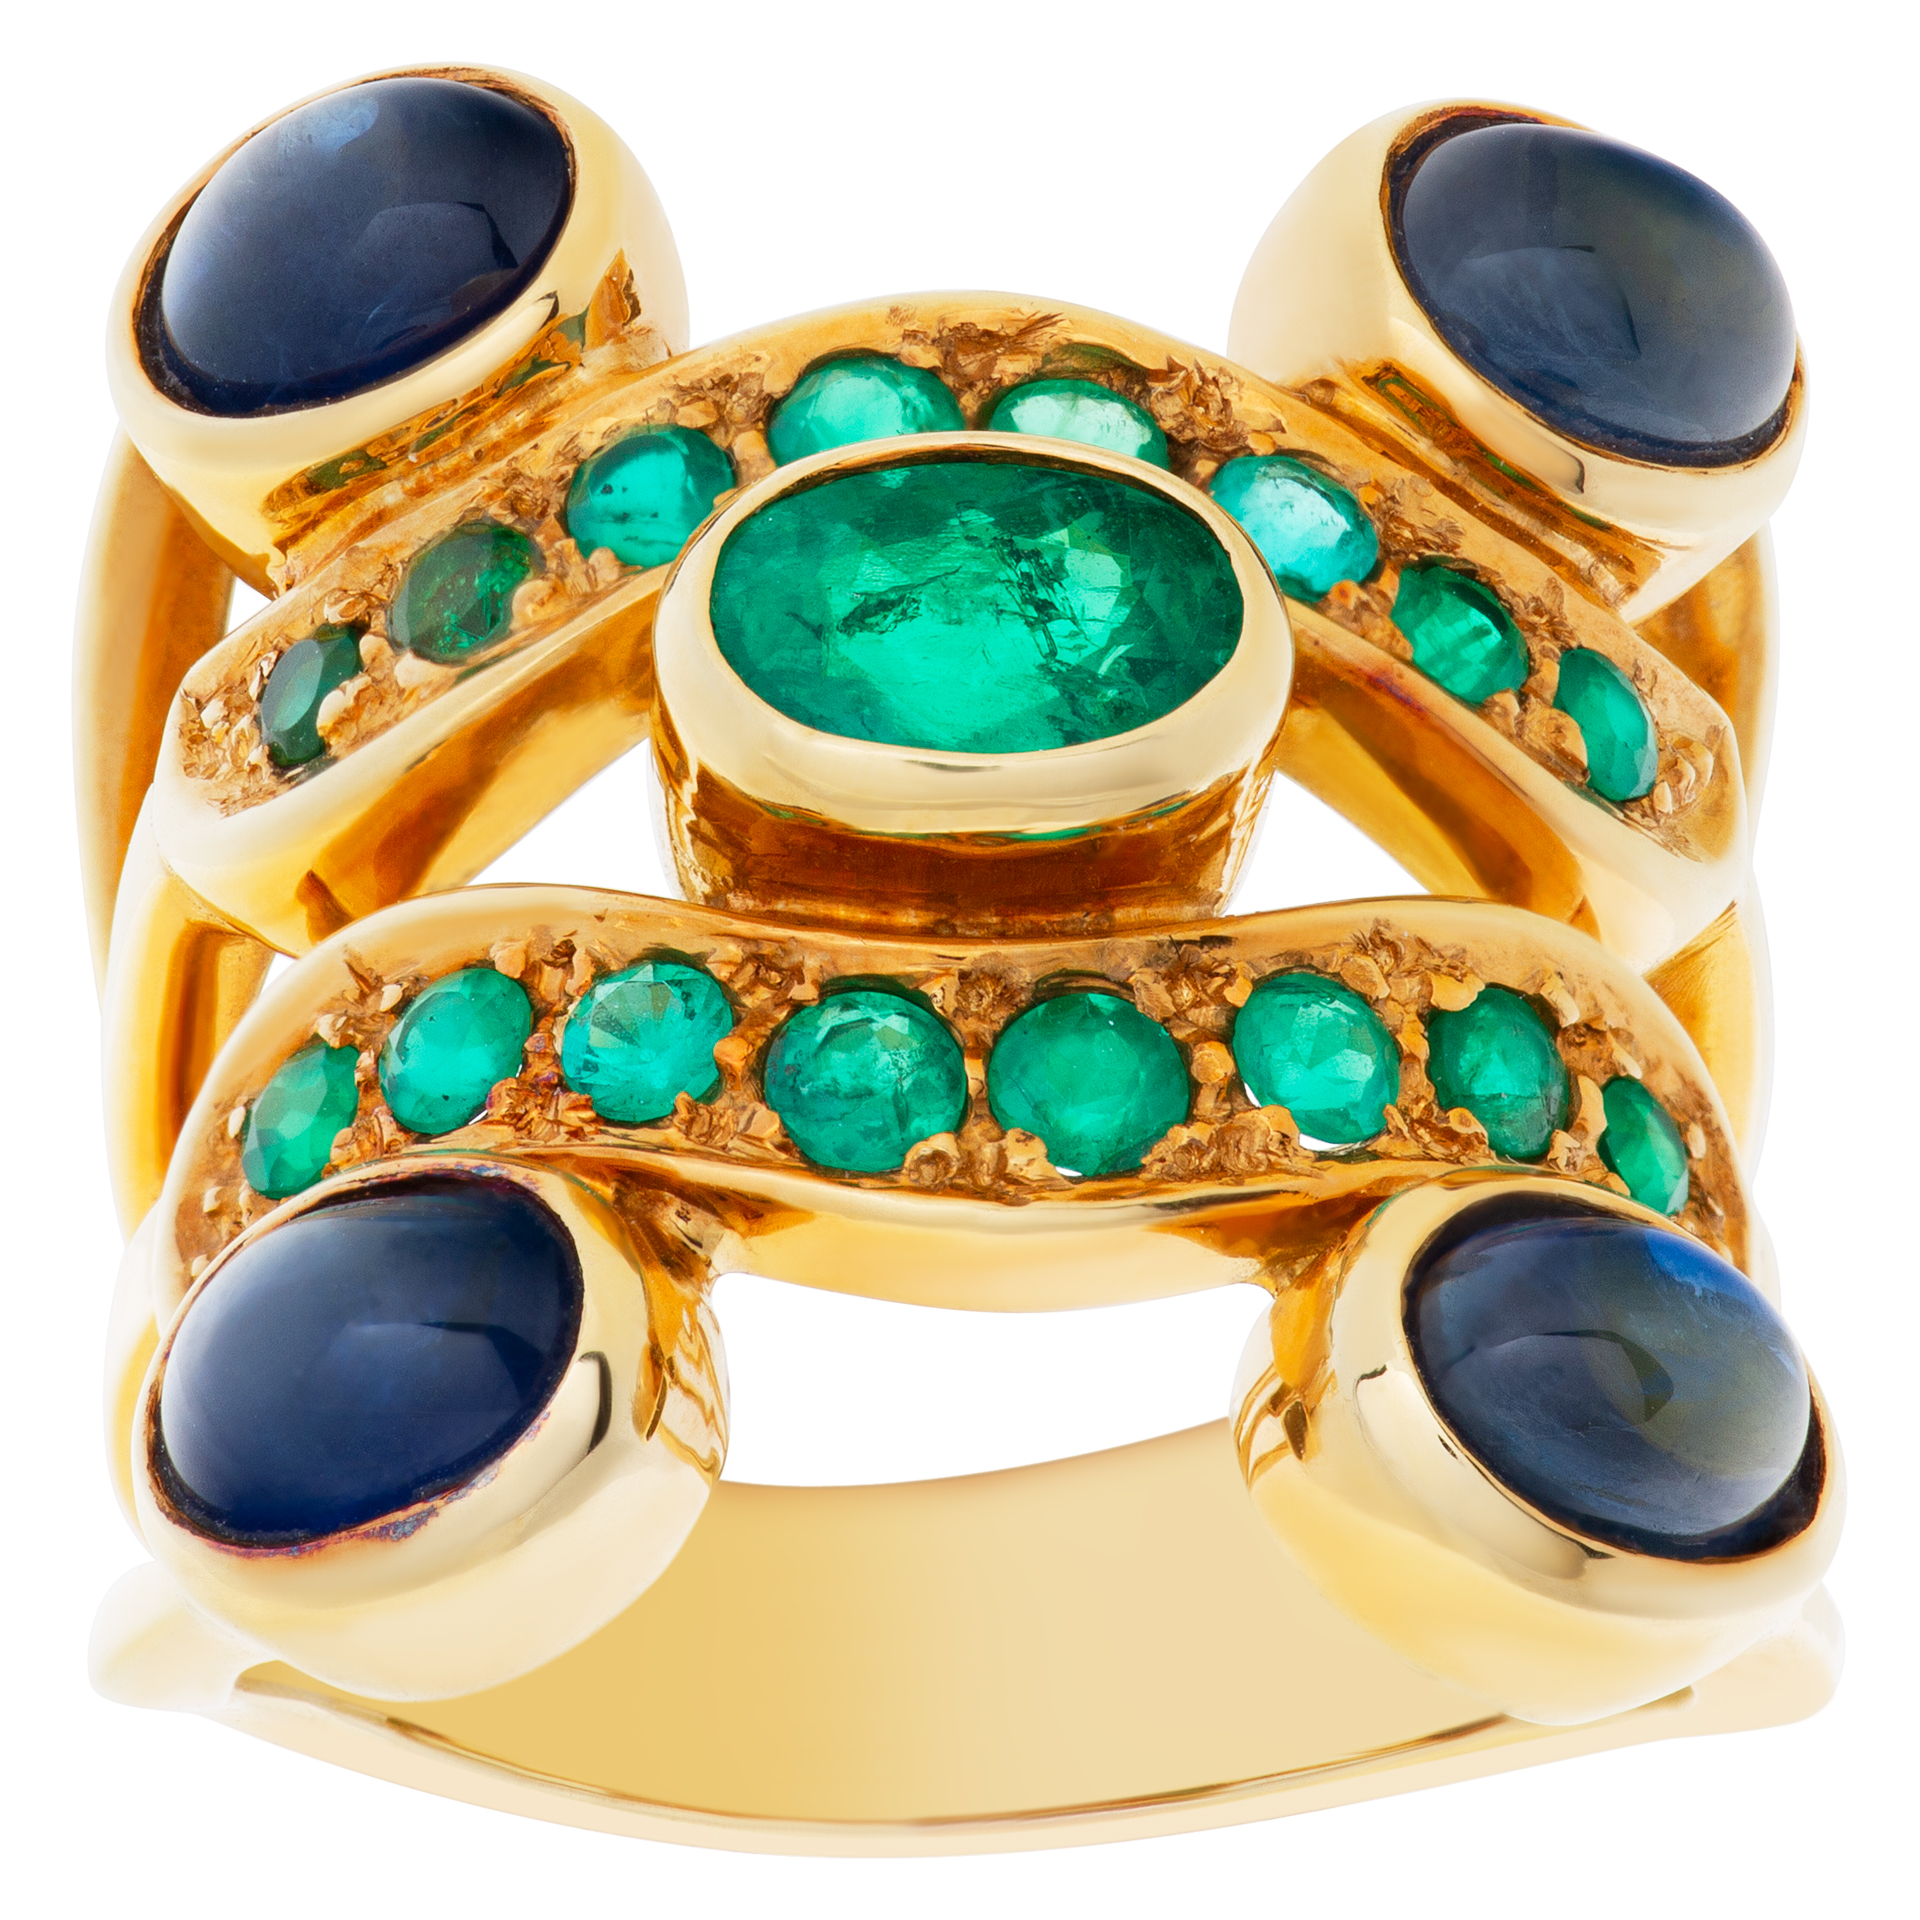 Brilliant oval and round cut Emeralds, cabochon sapphires ring set in 18k yellow gold. image 1